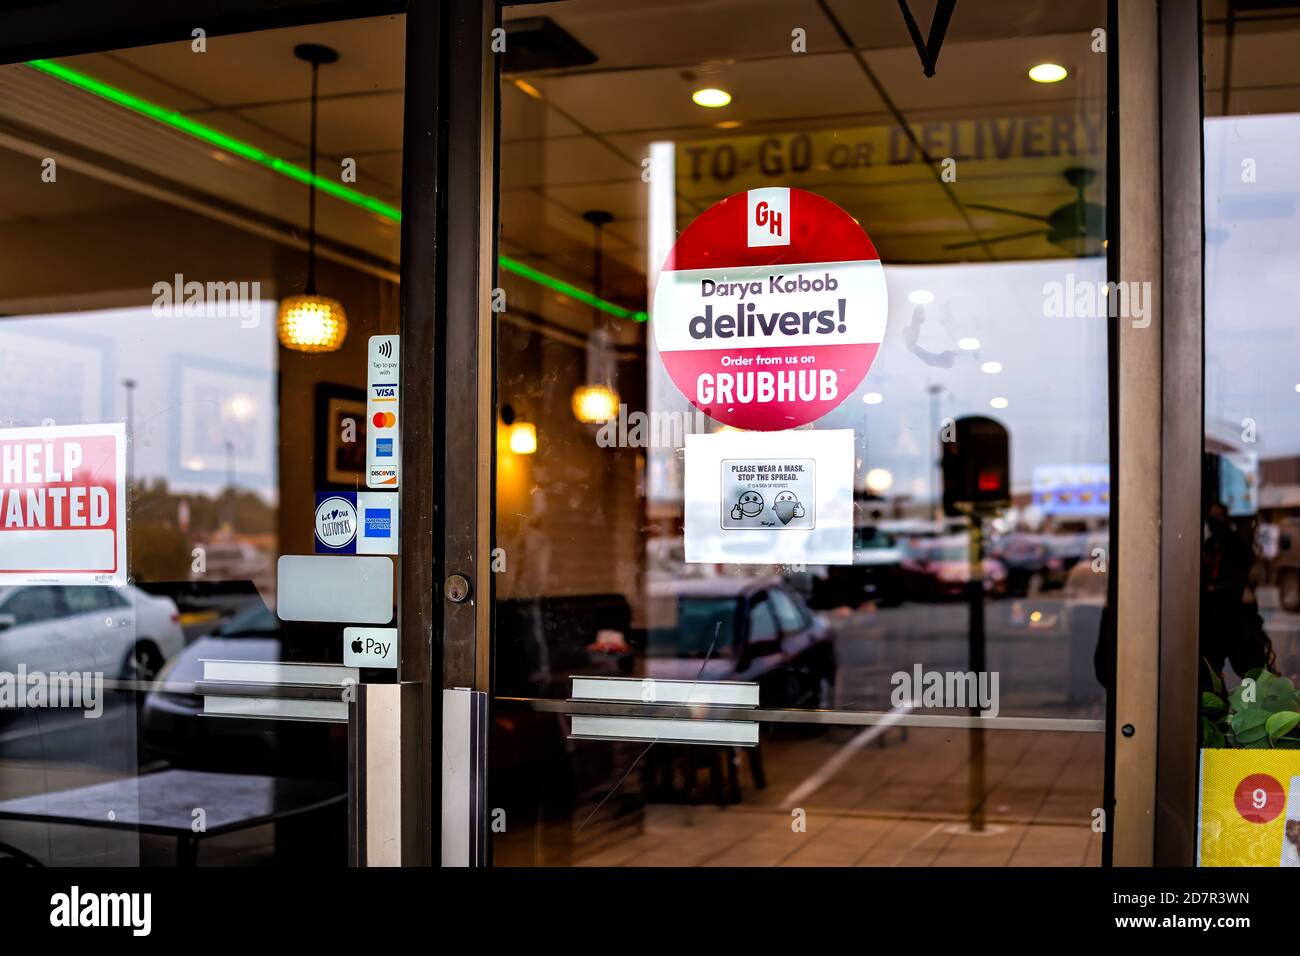 Sterling, USA - September 9, 2020: Sign for Darya Kabob business door entrance on window with text for Grubhub delivery takeout and help wanted in Vir Stock Photo